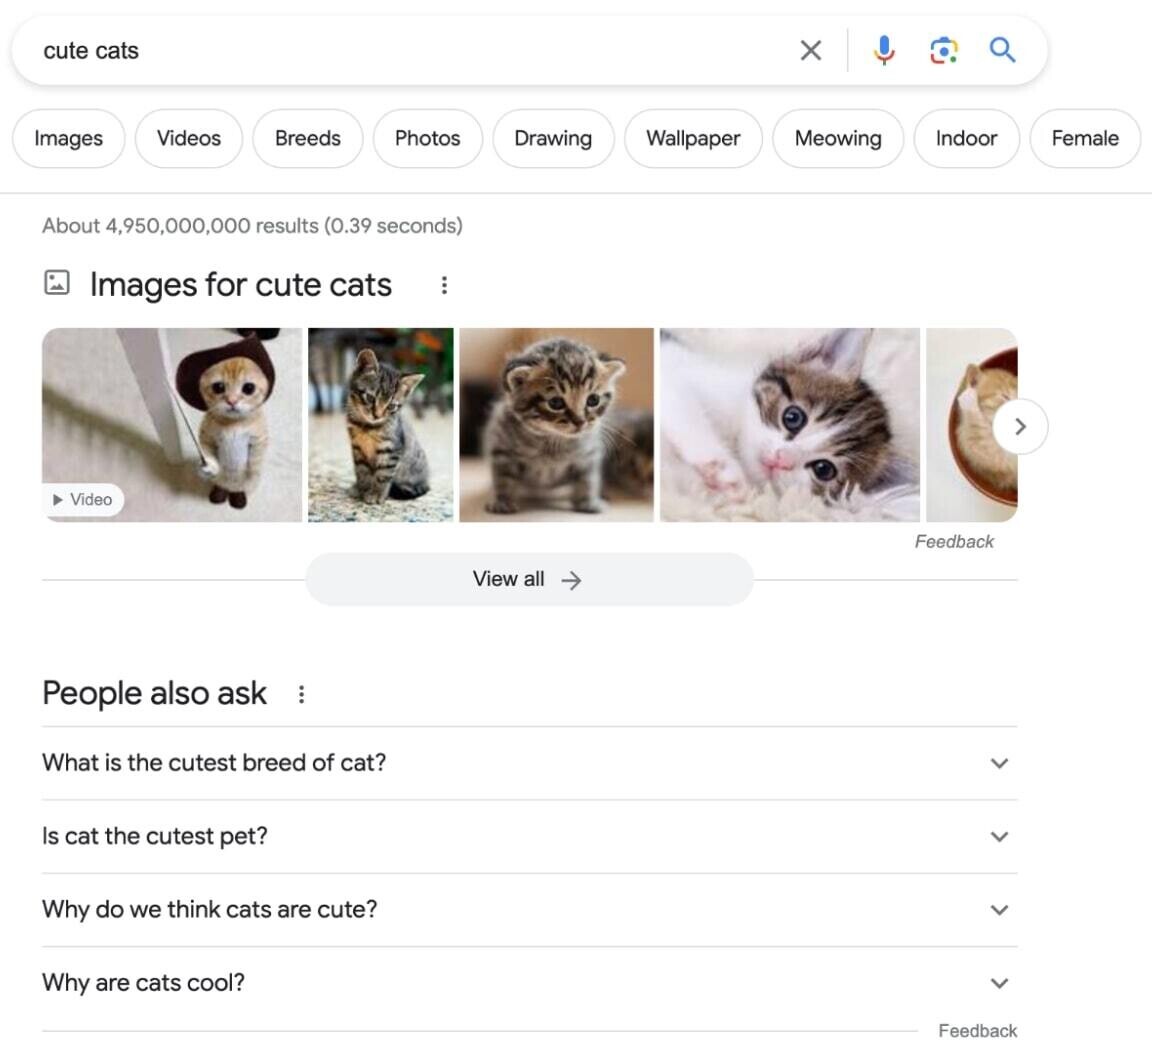 Google SERP for "cute cats" search